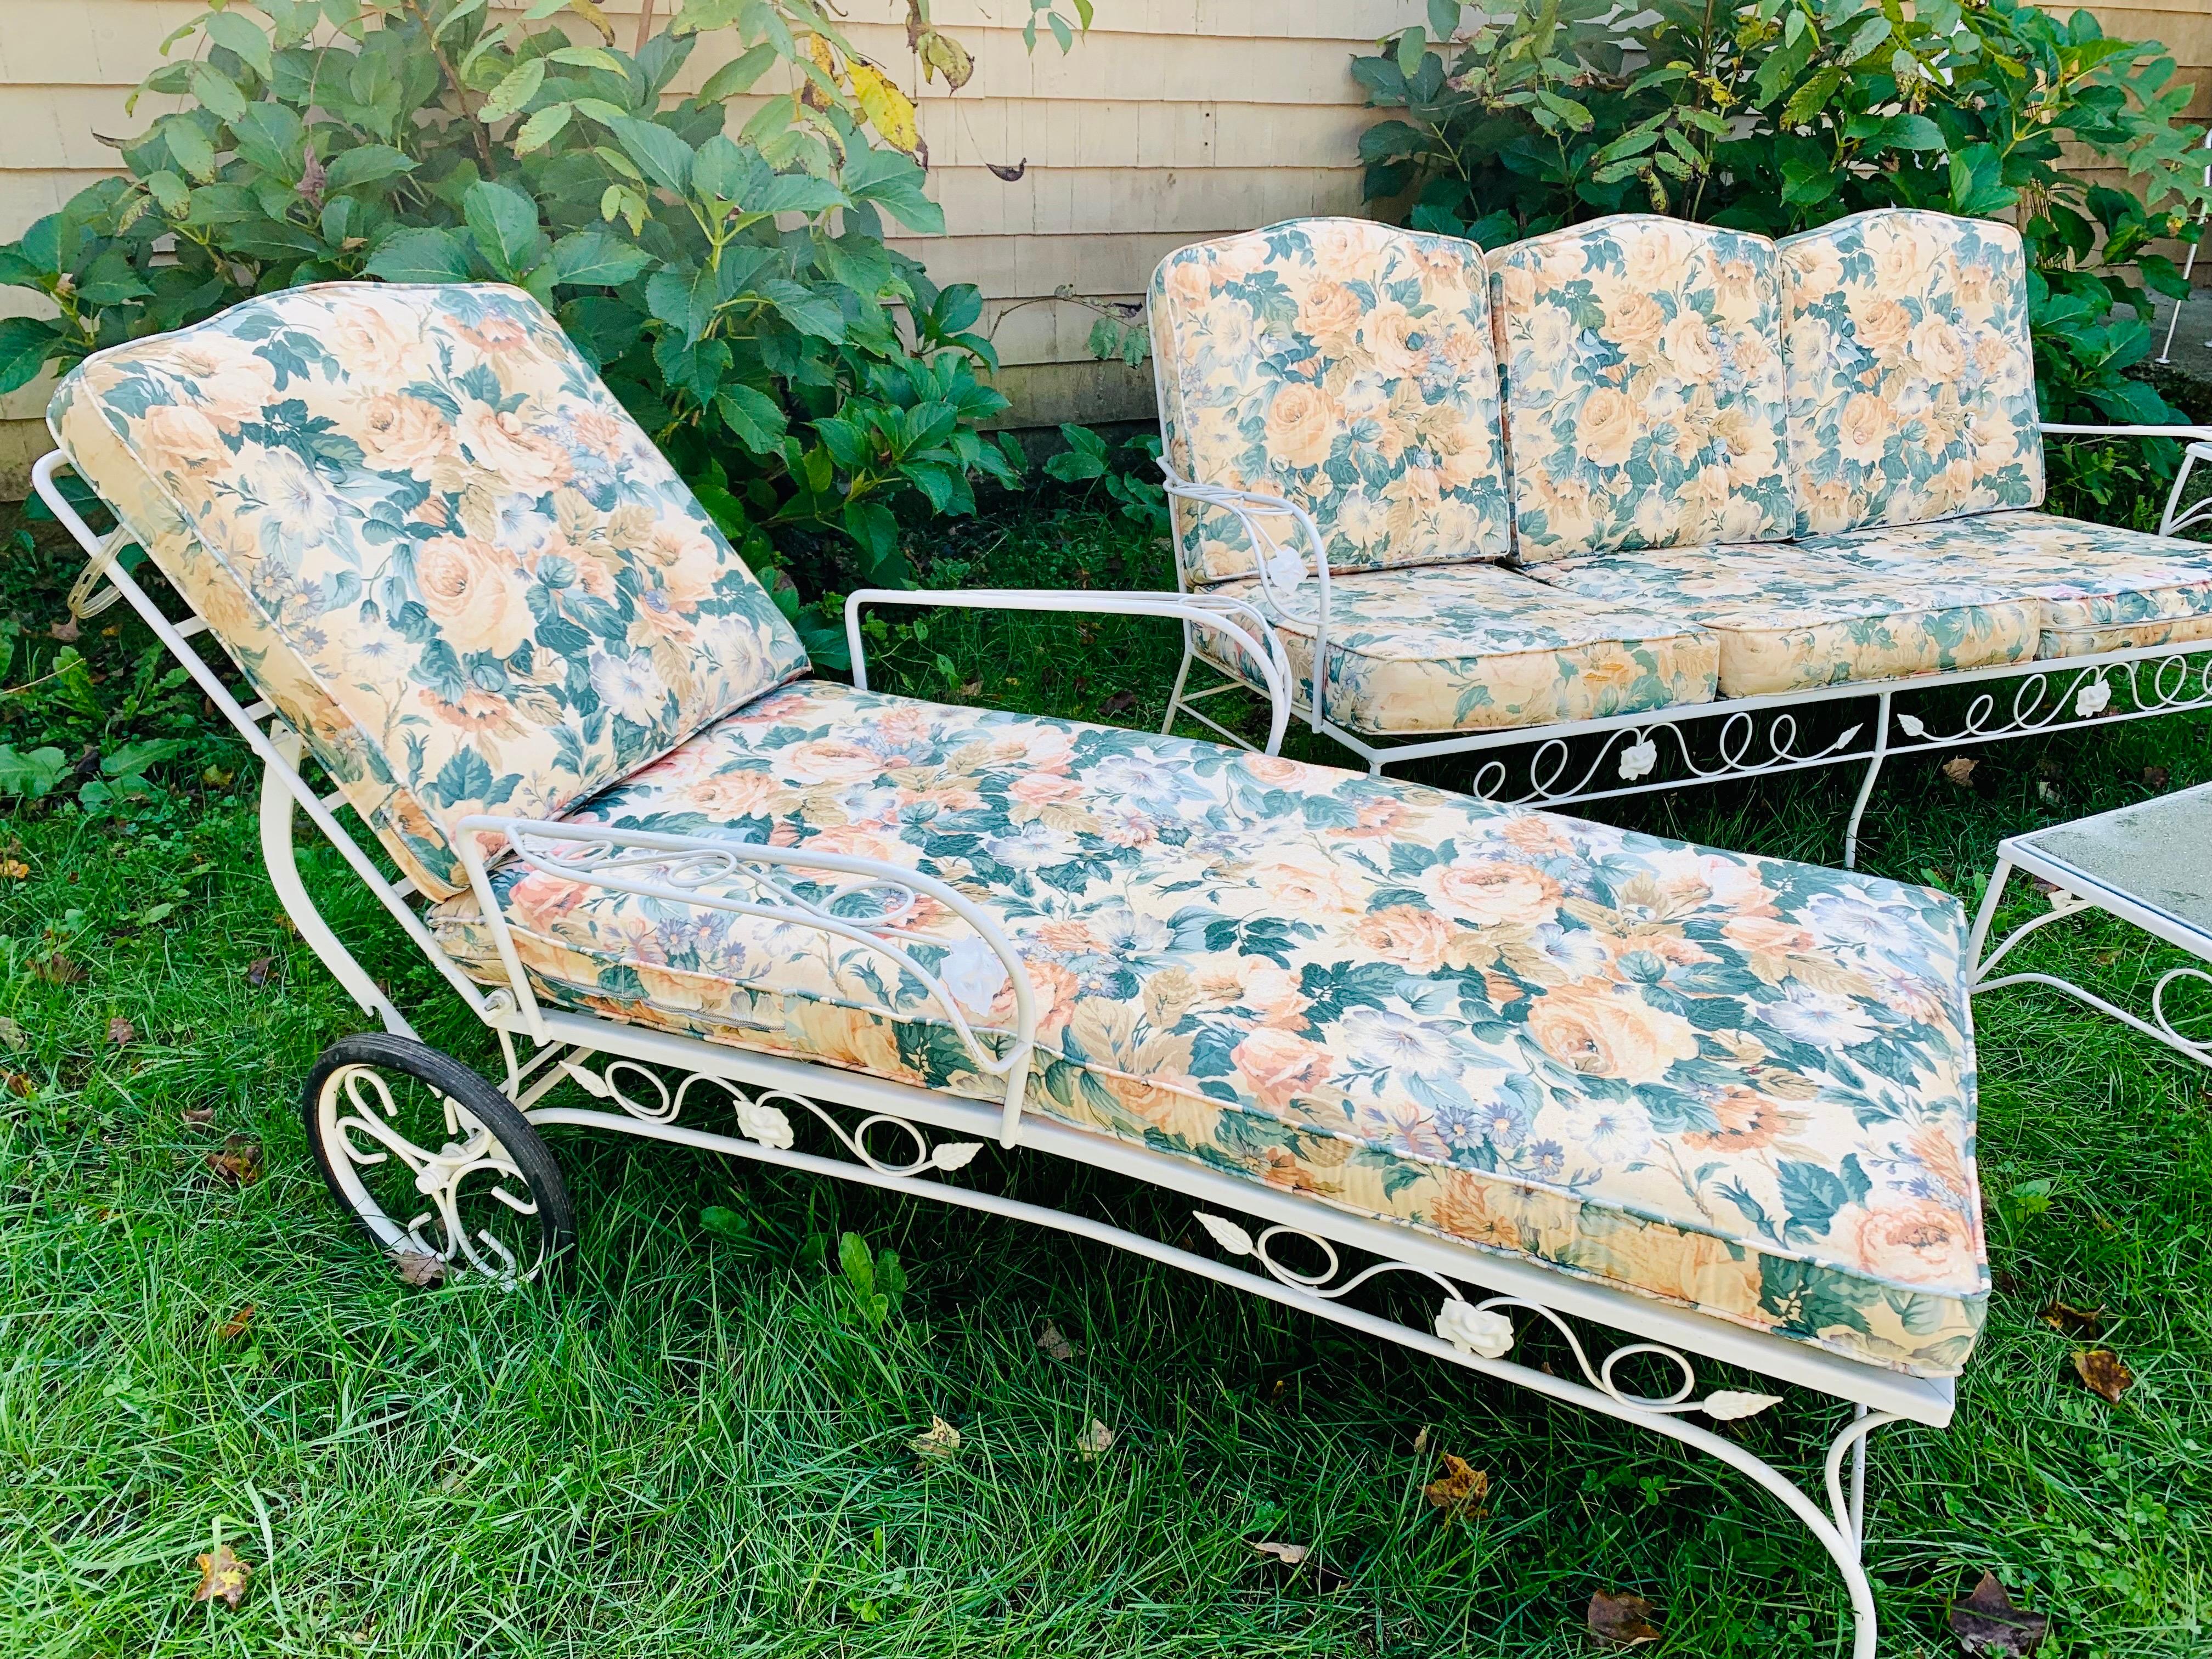 Vintage Wrought iron sofa set Refinished by TVPB

This set will be completely refinished being sandblasted and powder coated in choice of color like classic black or white, along with 10 upholstered outdoor cushions with removable covers in fabric